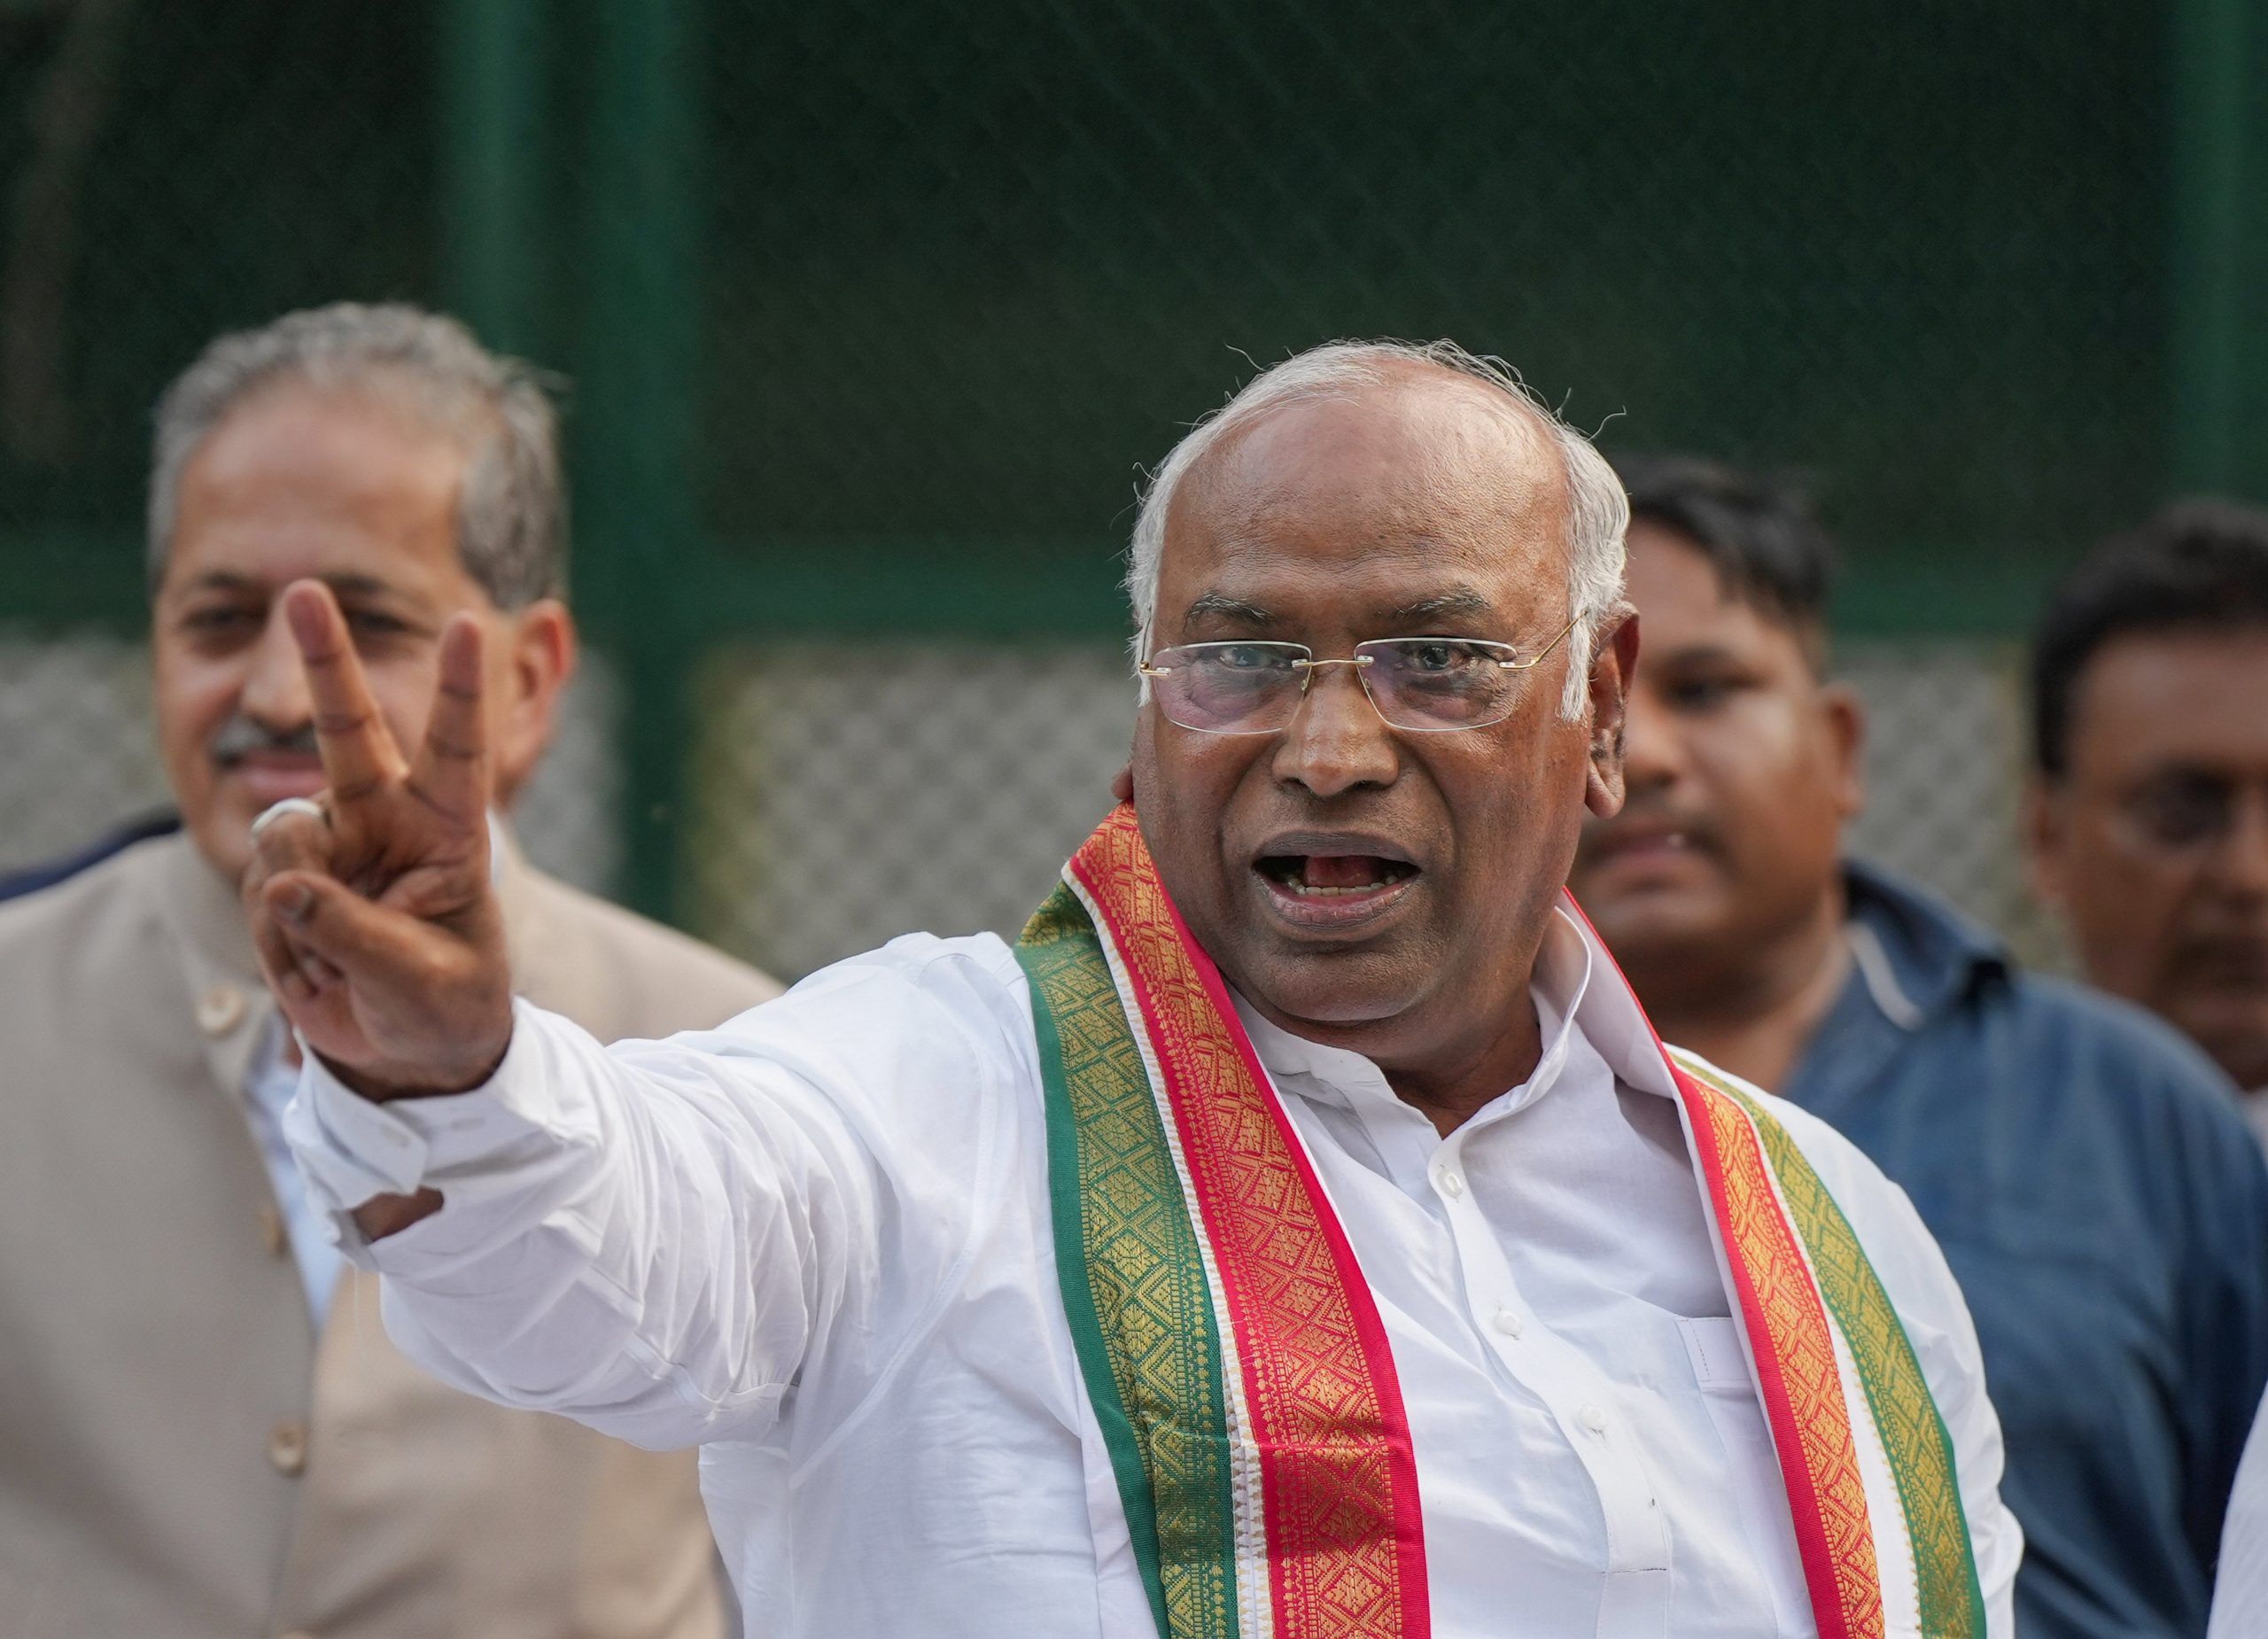 Mallikarjun Kharge, new Congress president, calls for unity after vote